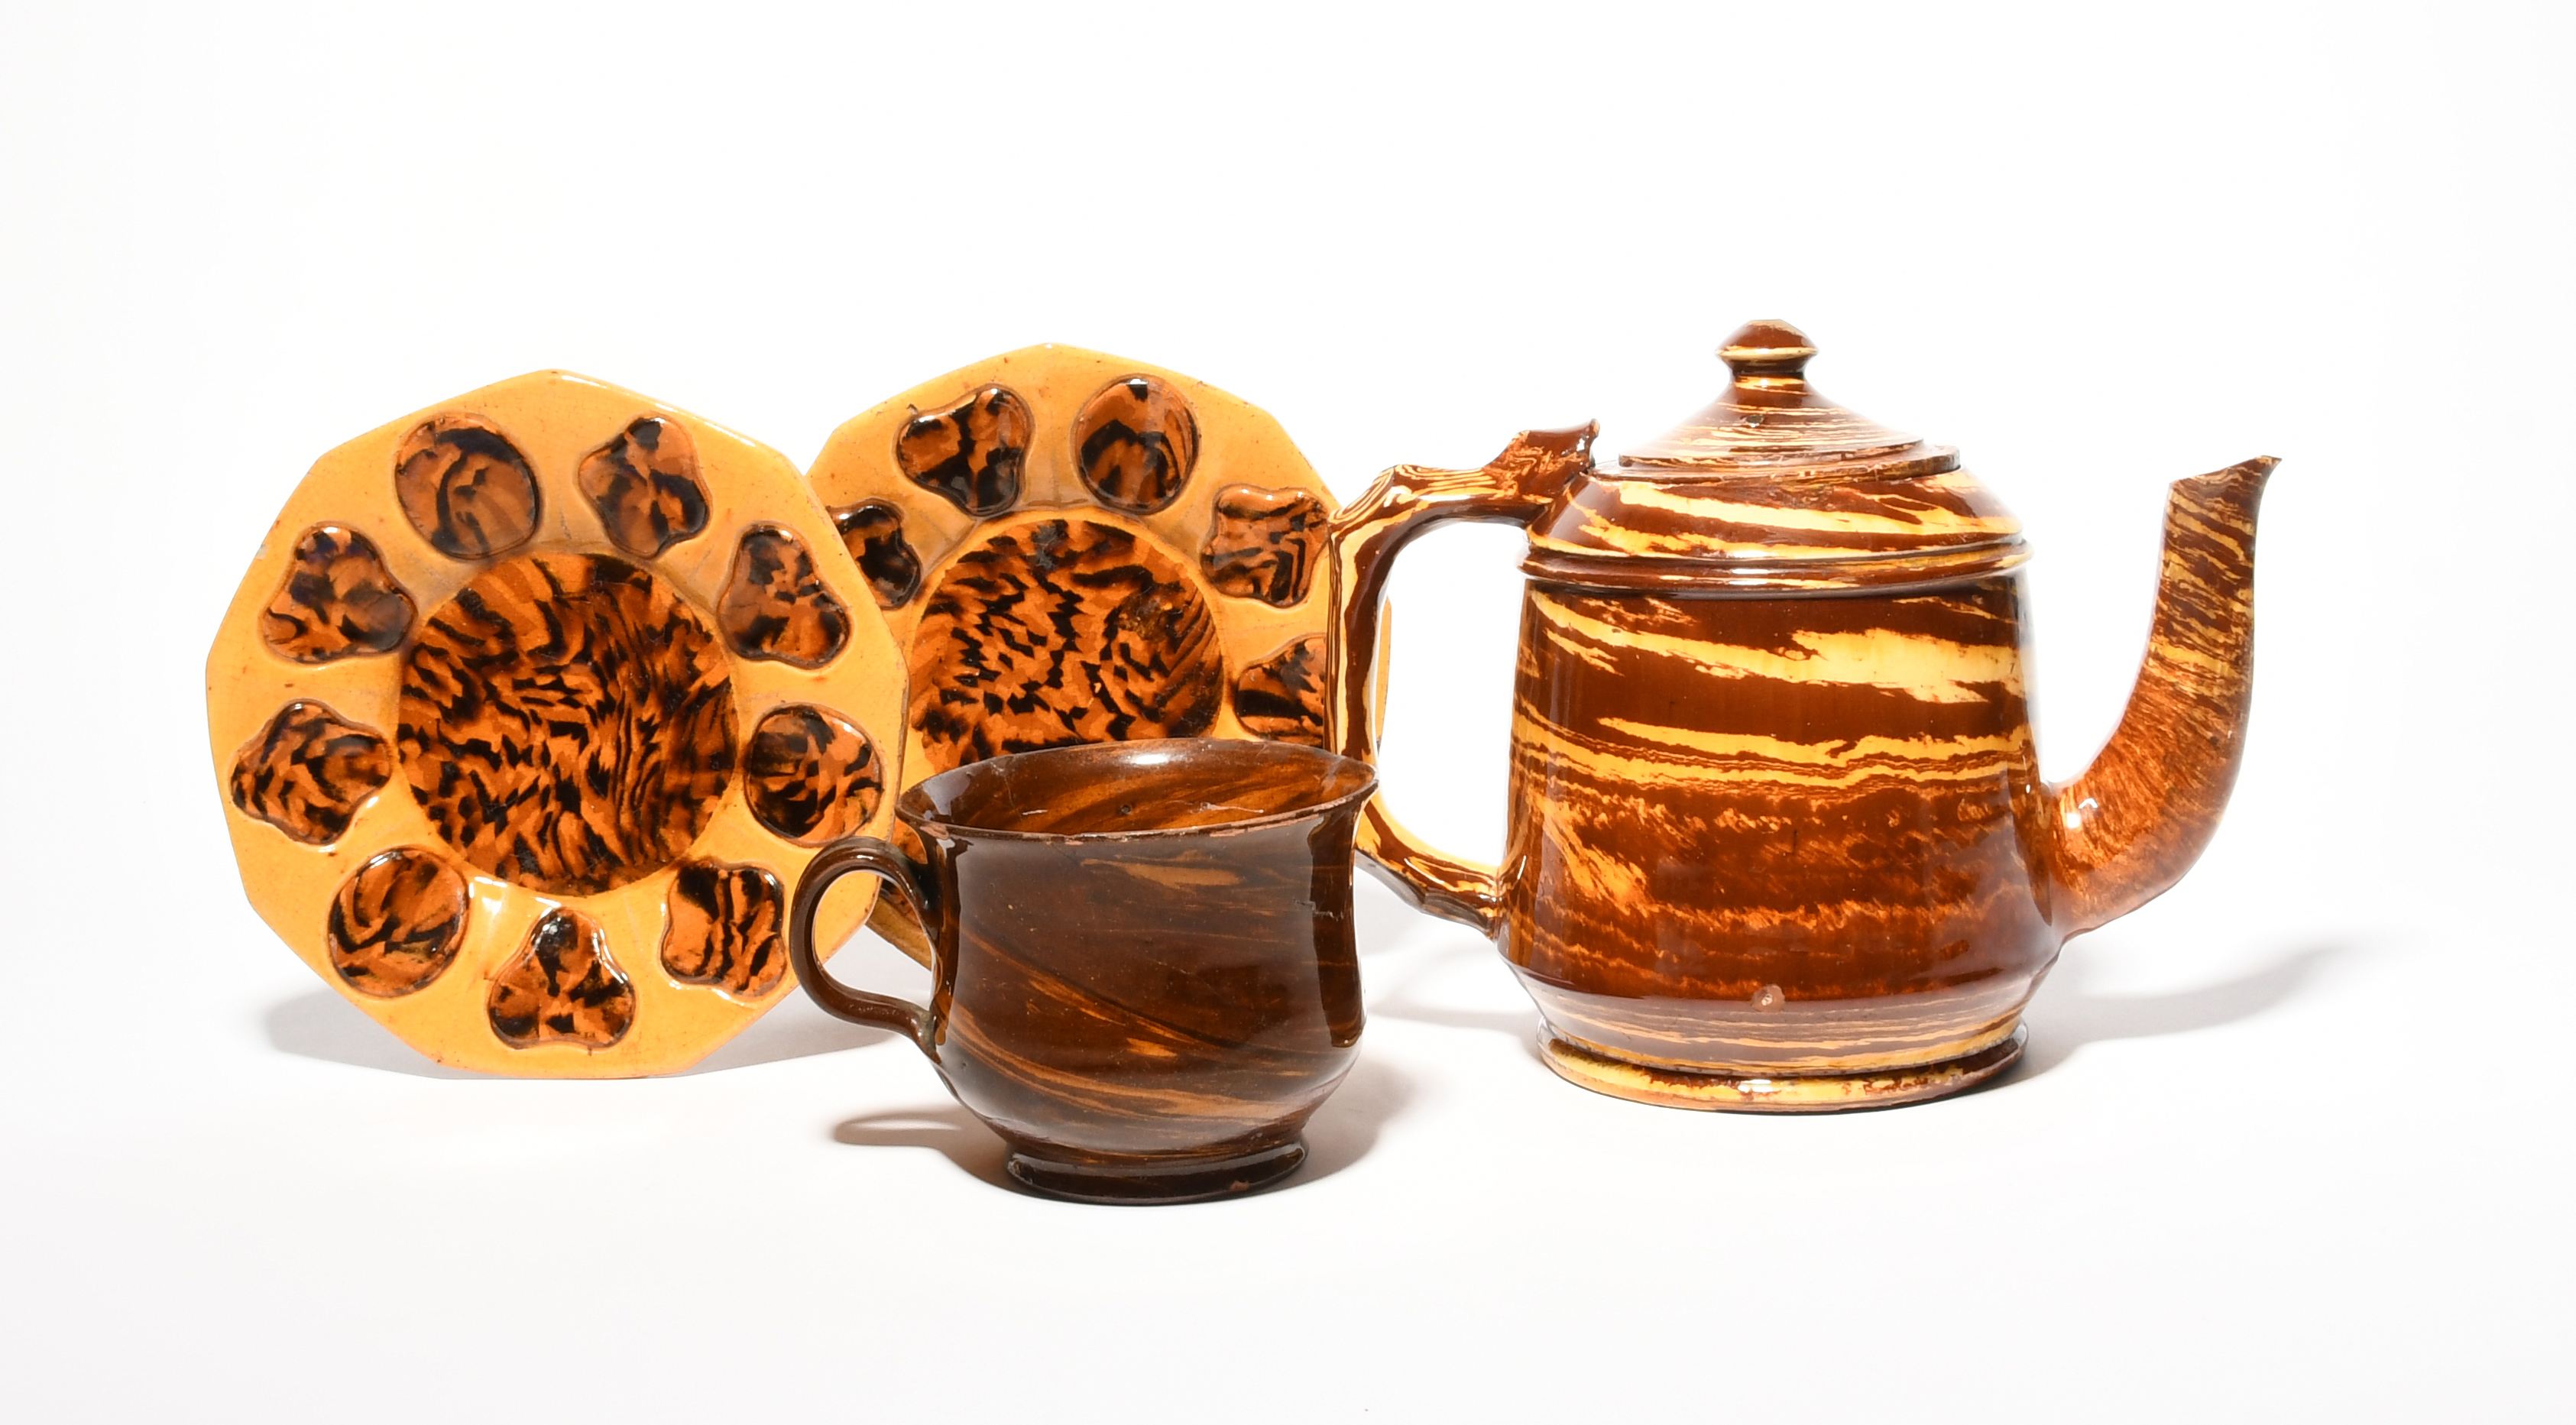 A Staffordshire slipware cup, late 18th century, modelled as agateware with cream and treacle - Image 2 of 2